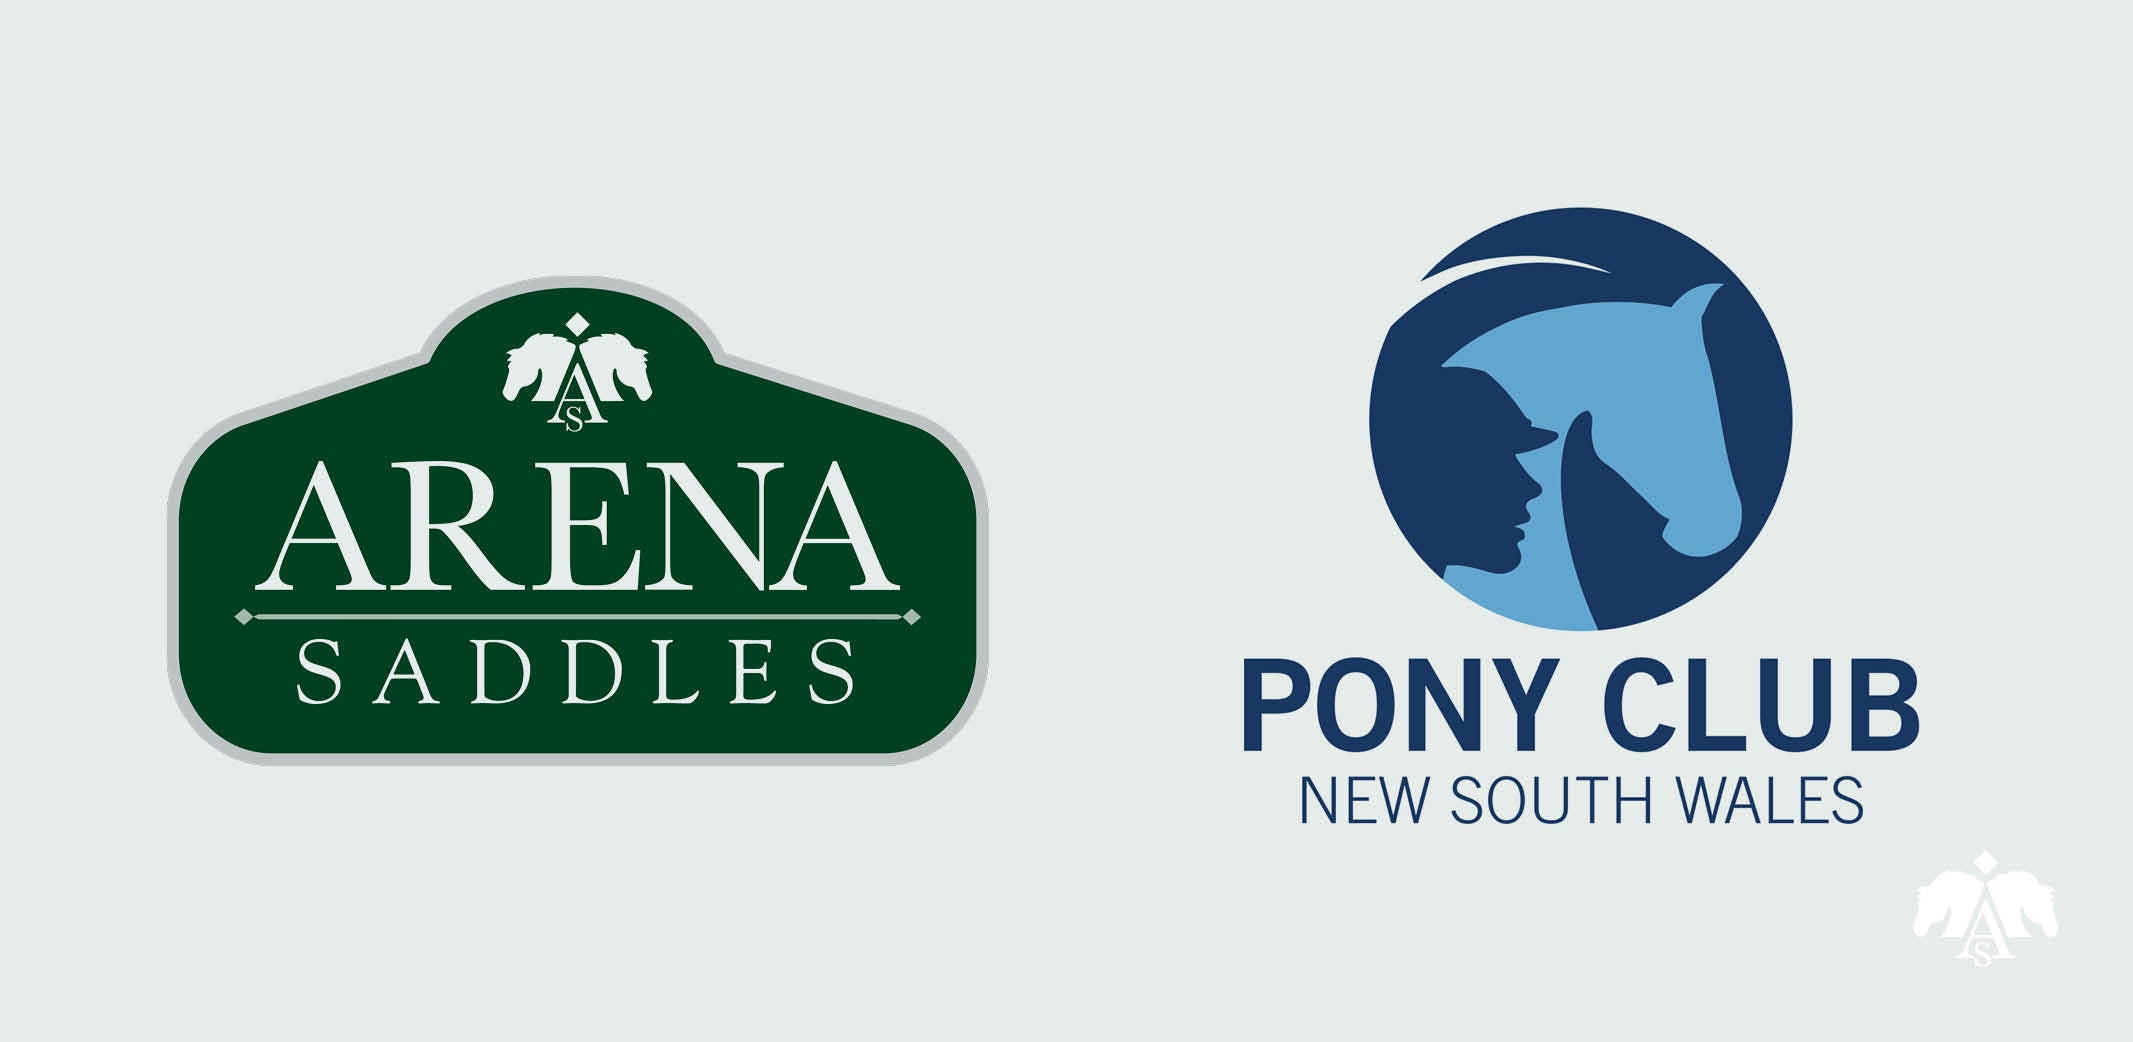 Partnership announcement: The Pony Club Association of NSW